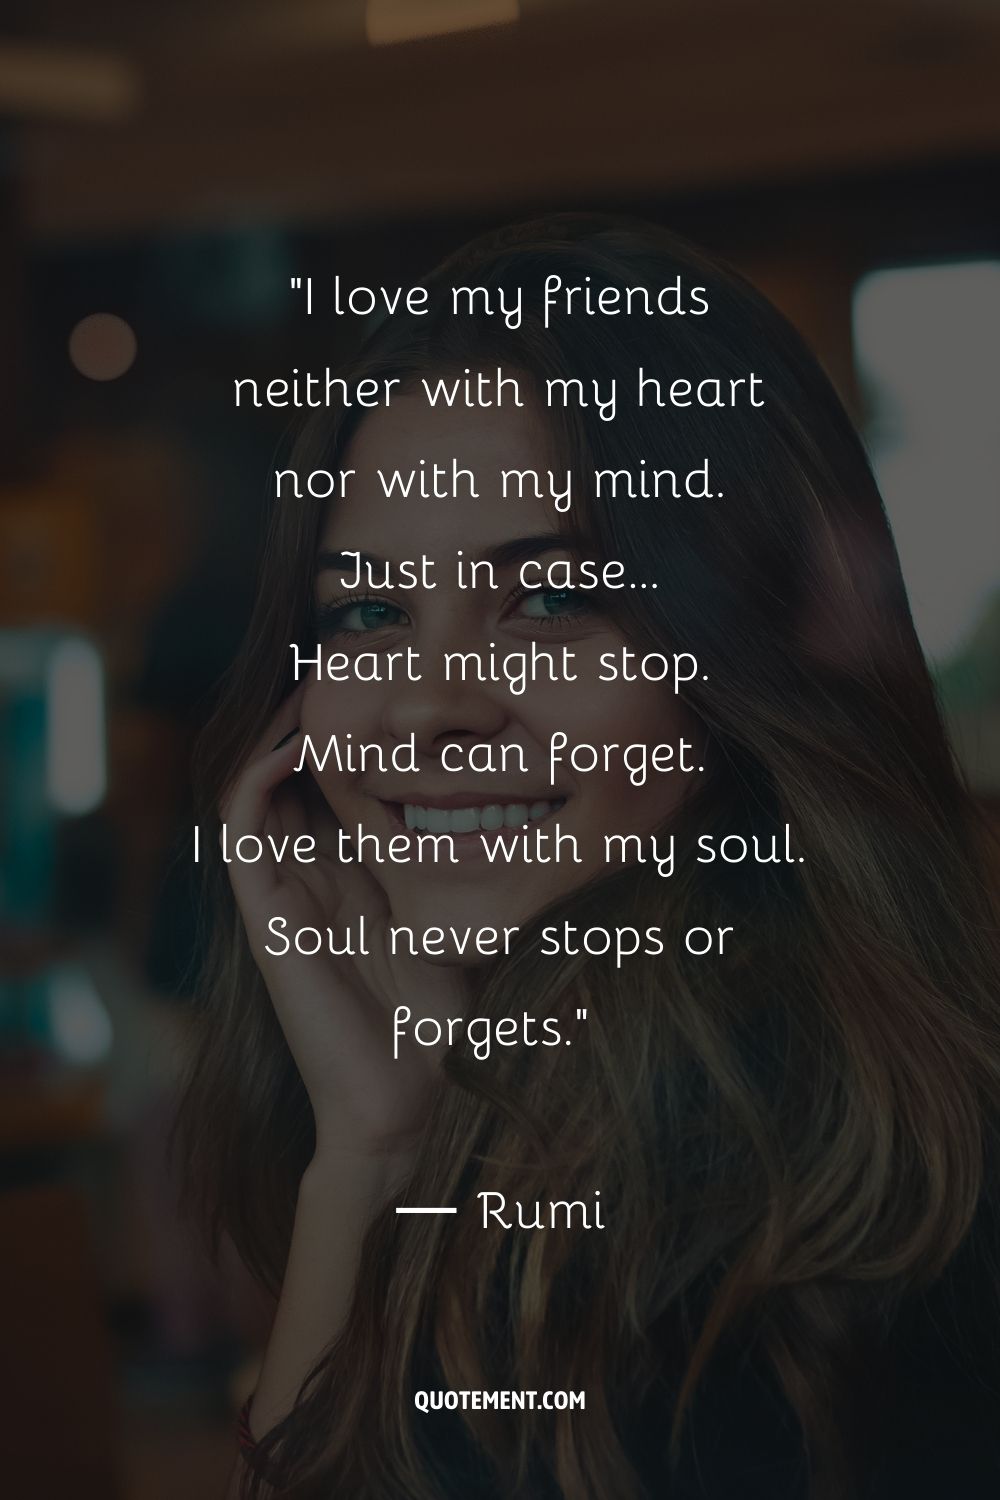 I love my friends neither with my heart nor with my mind.